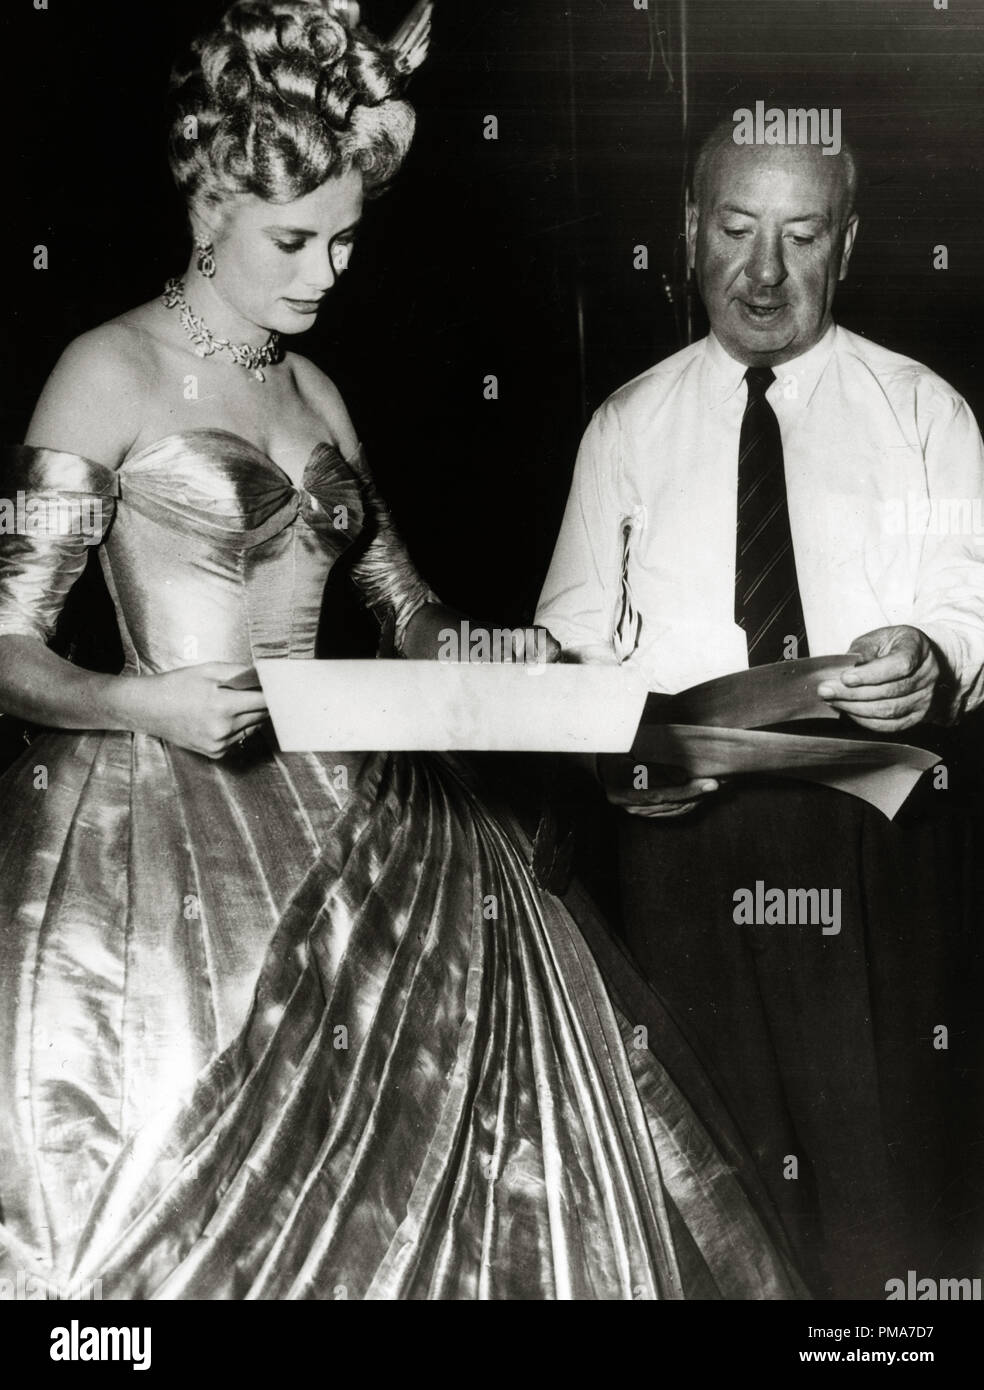 Grace Kelly and Alfred Hitchcock on the set of 'To Catch a Thief, 1955  Paramount Pictures File Reference # 32263 290THA Stock Photo - Alamy